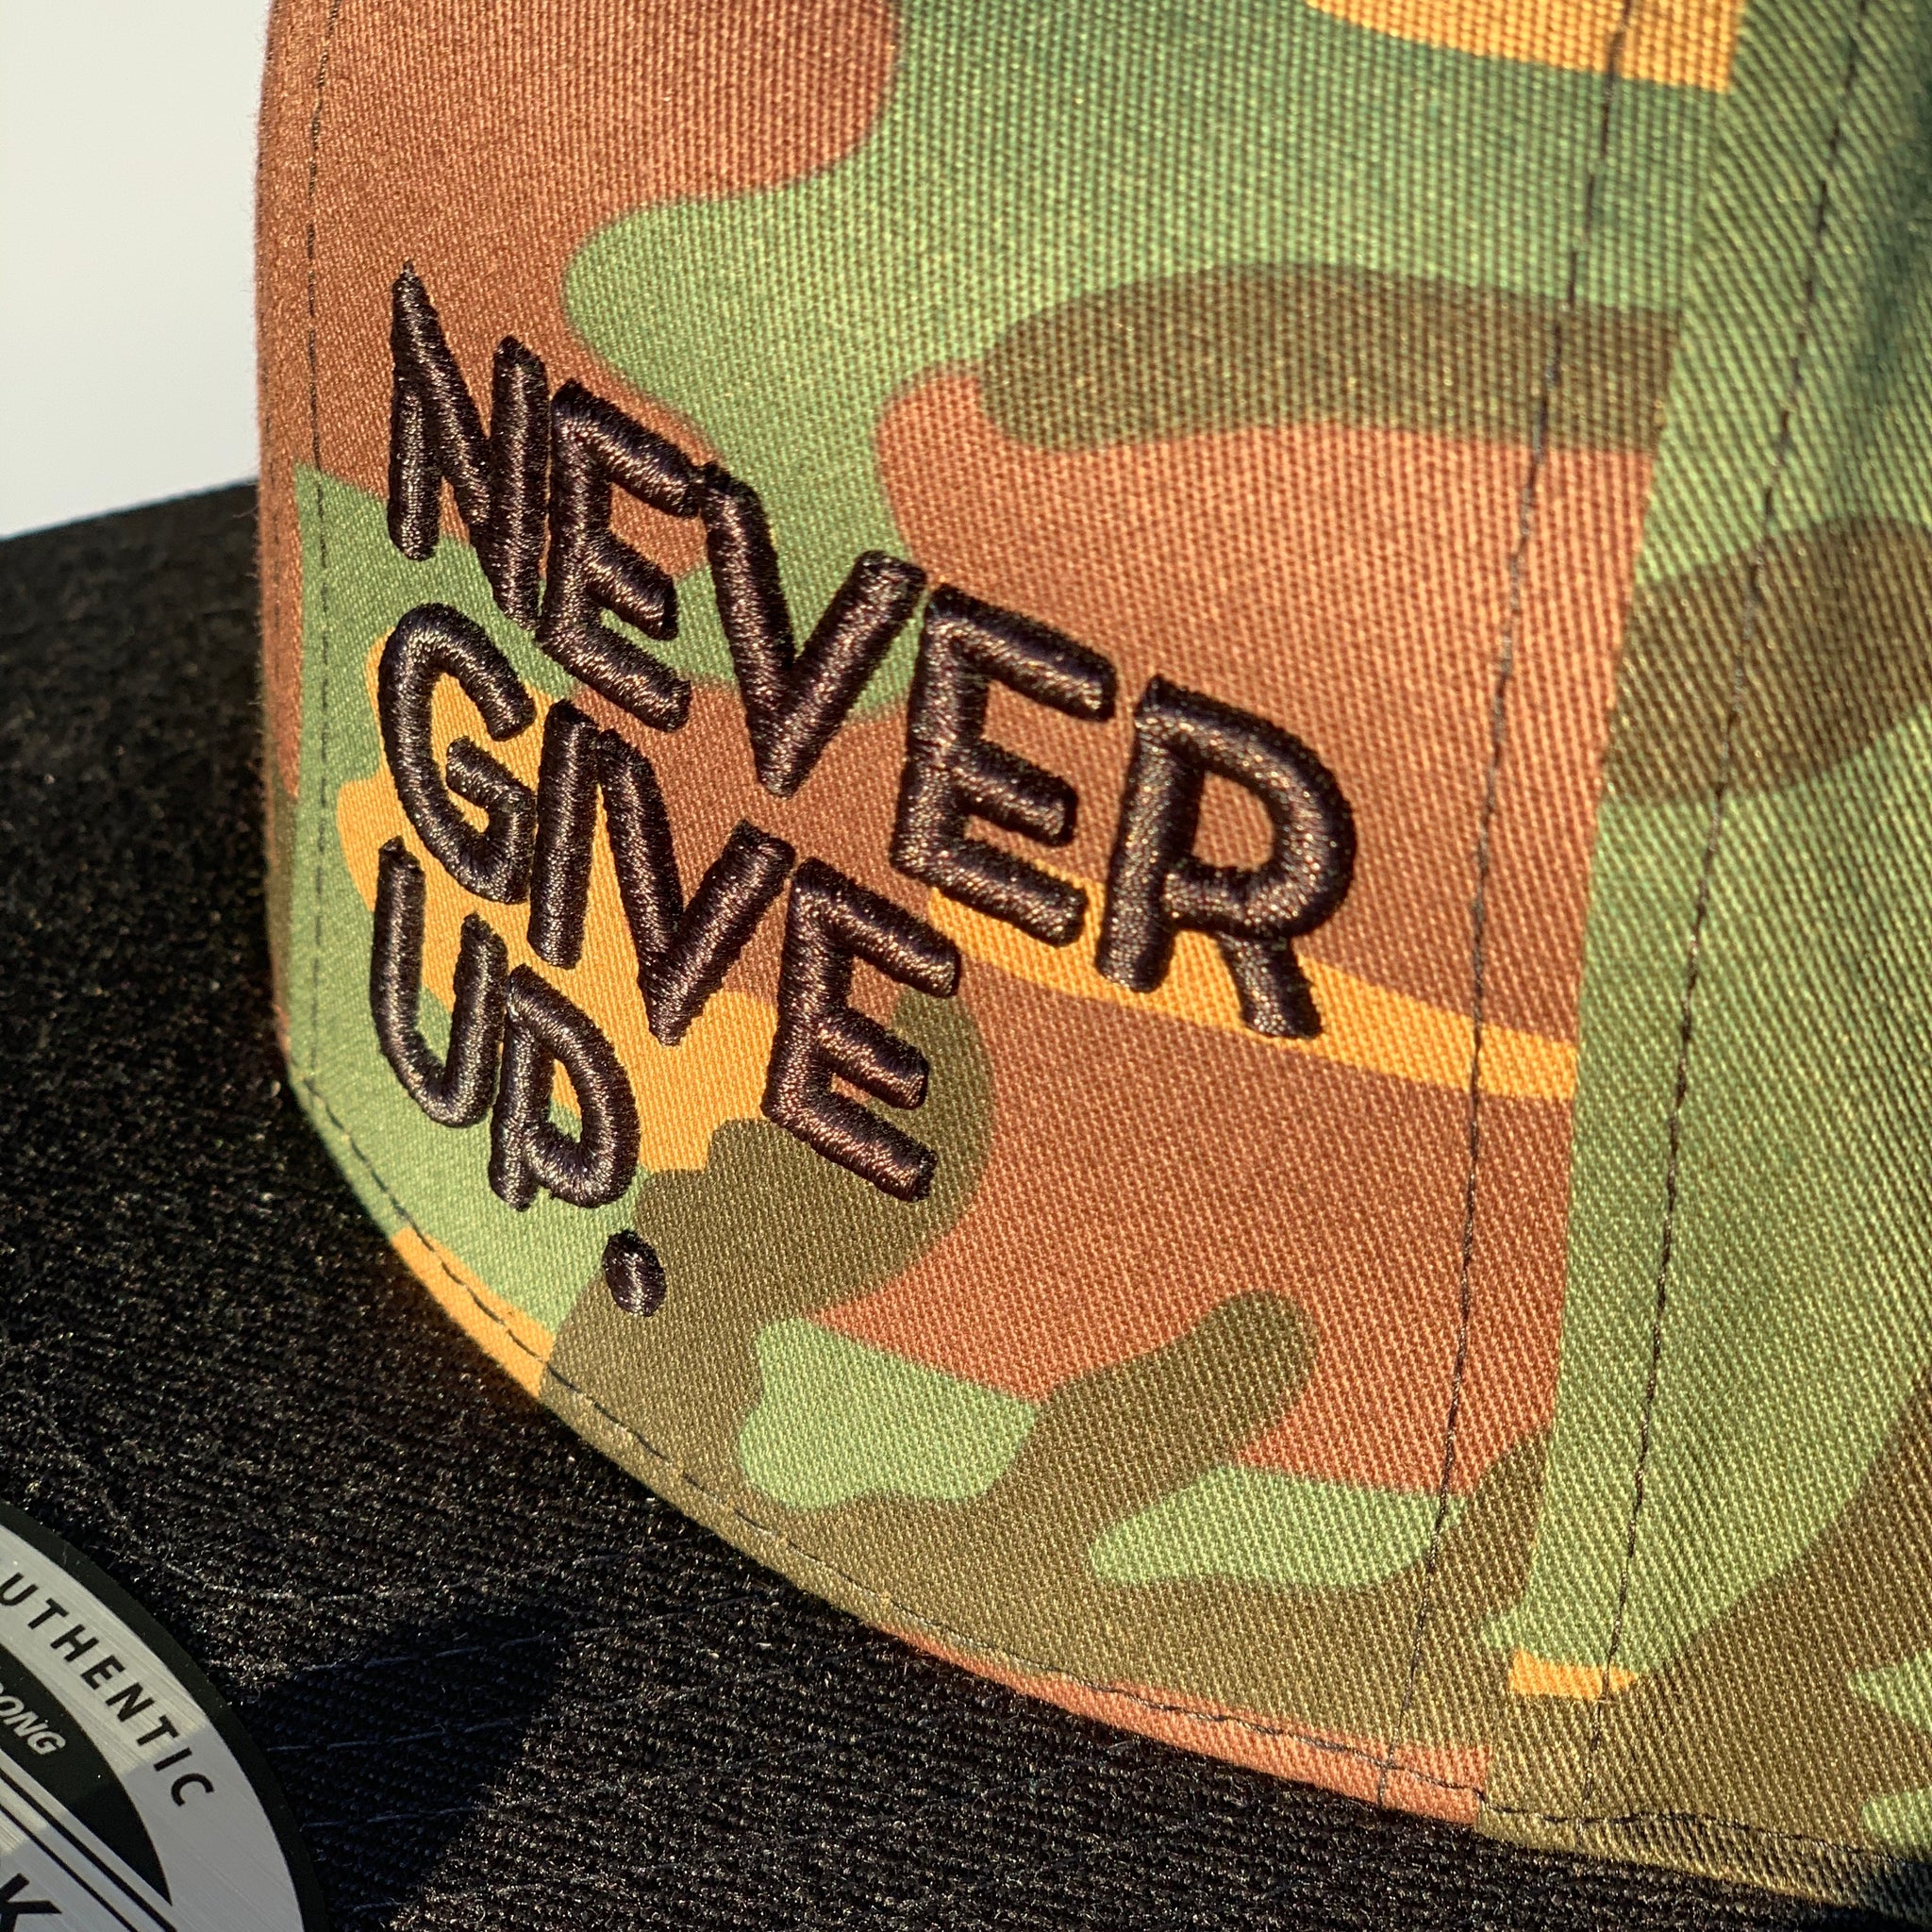 3D CAMO NEVER GIVE UP. HAT